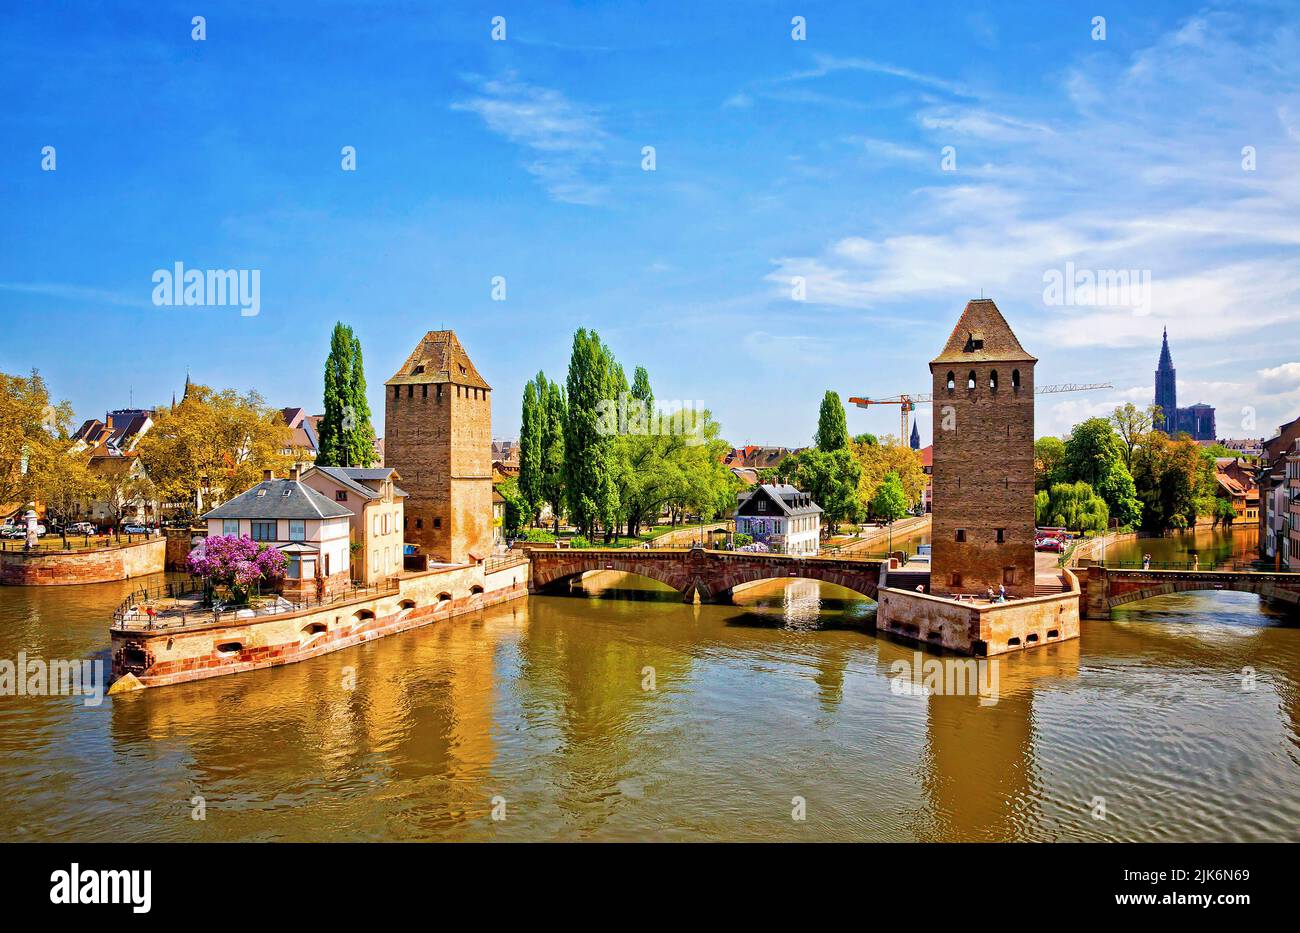 Three bridges and two towers of the medieval bridge Ponts Couverts in Strasbourg city, Alsace, France Stock Photo